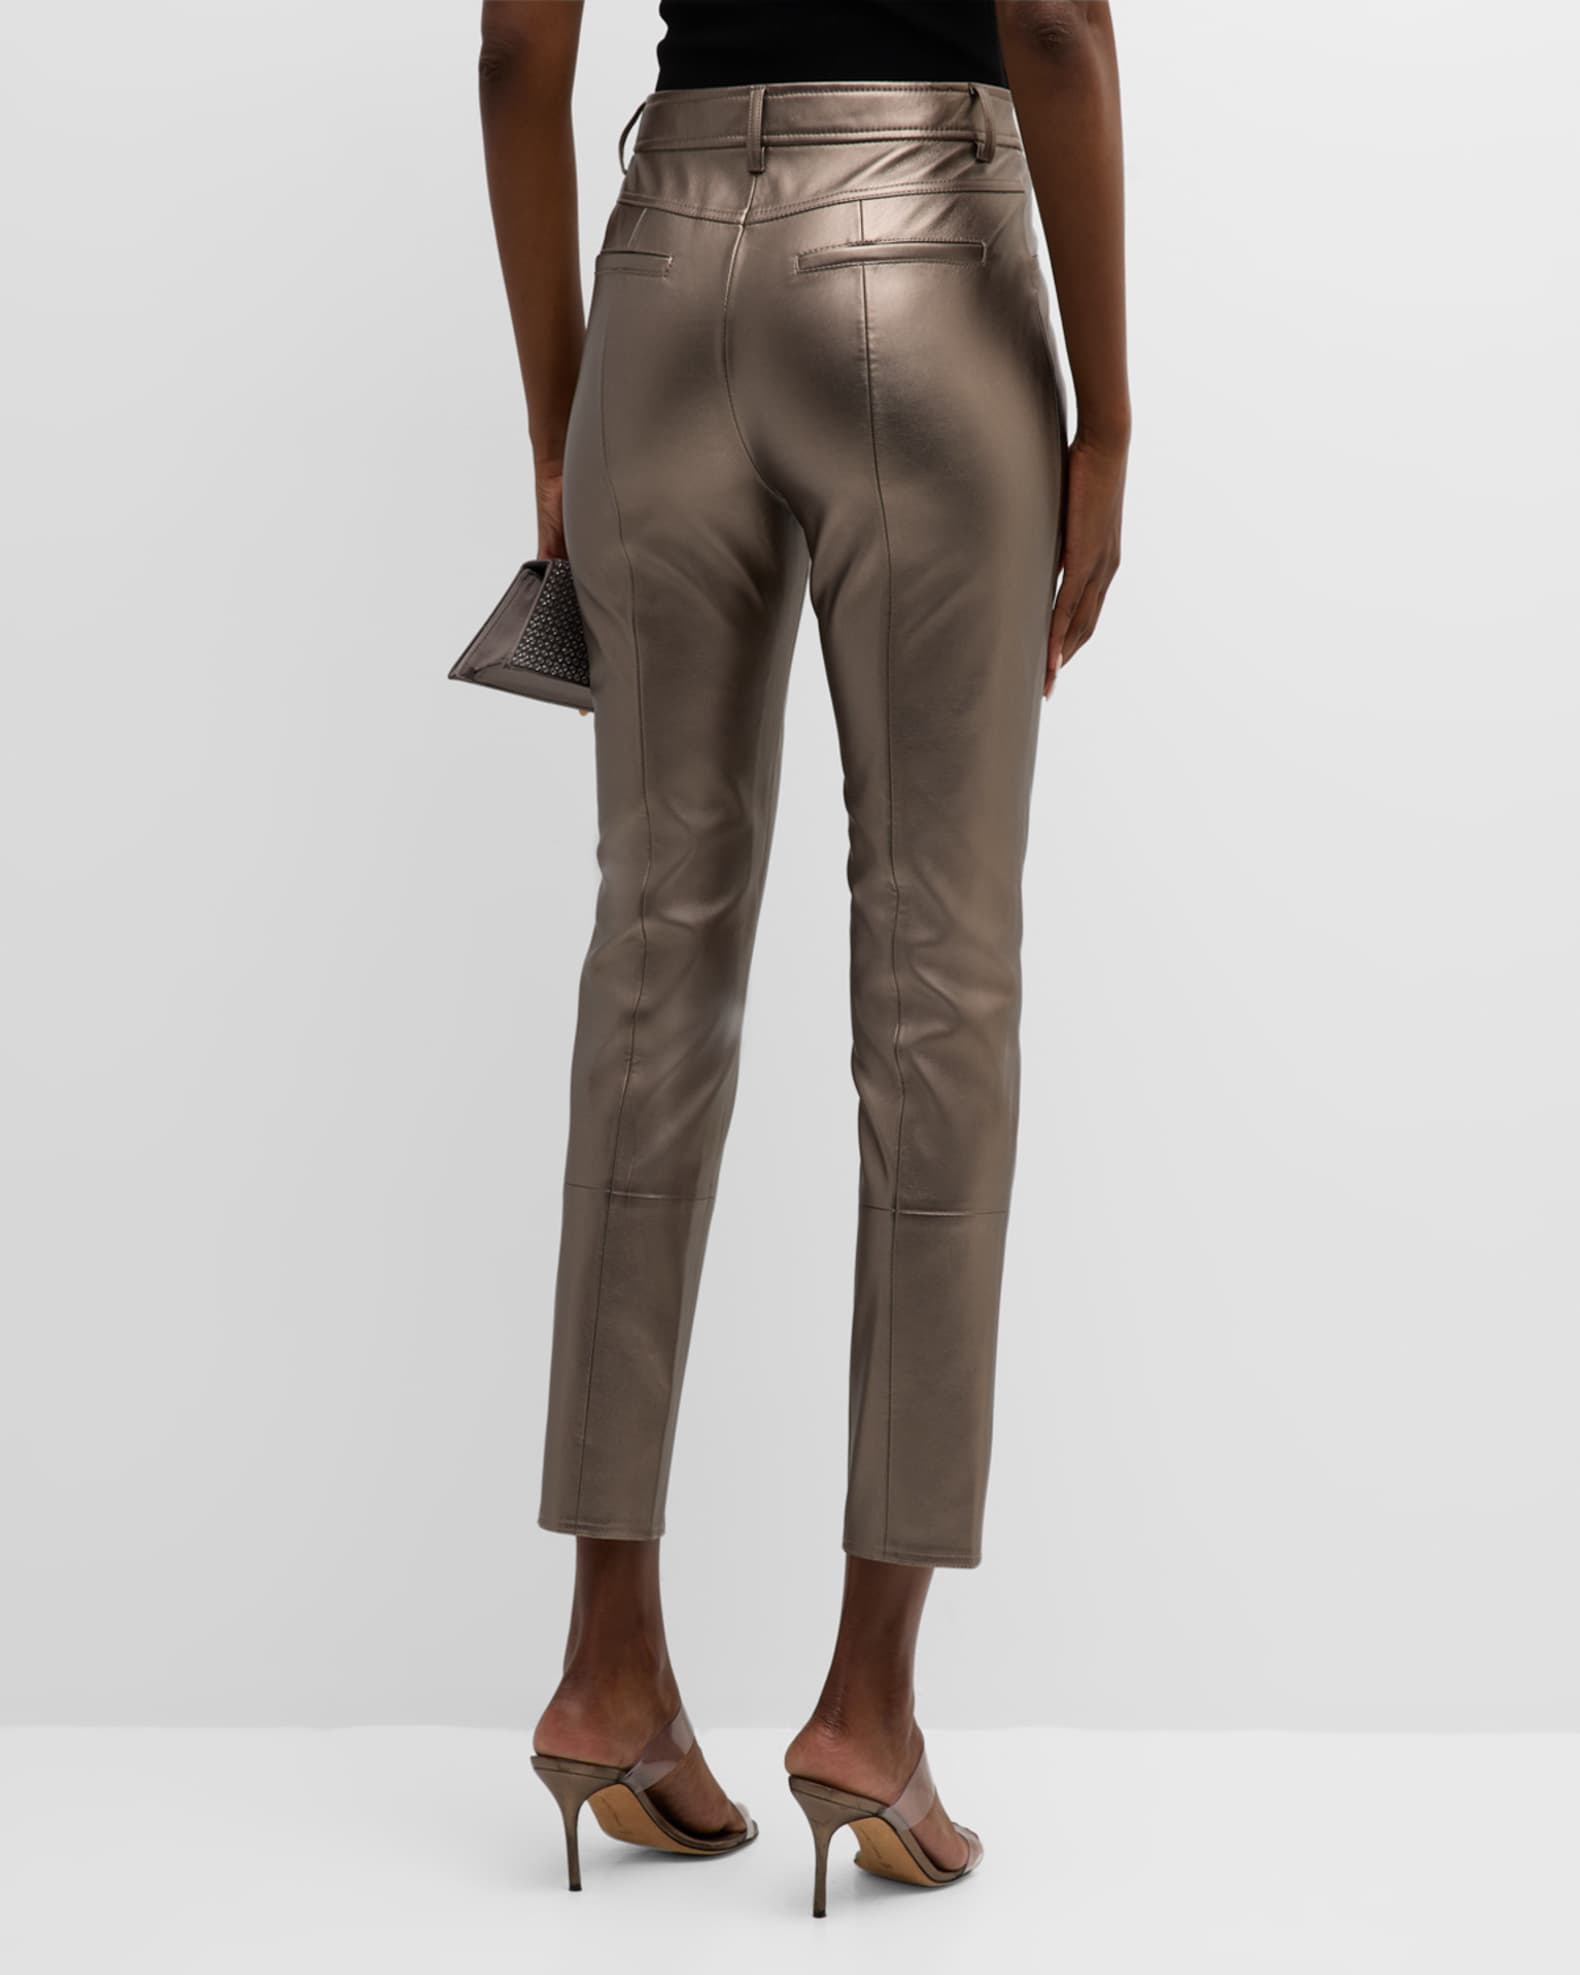 Milly Rue Faux Leather Skinny Pants | Neiman Marcus